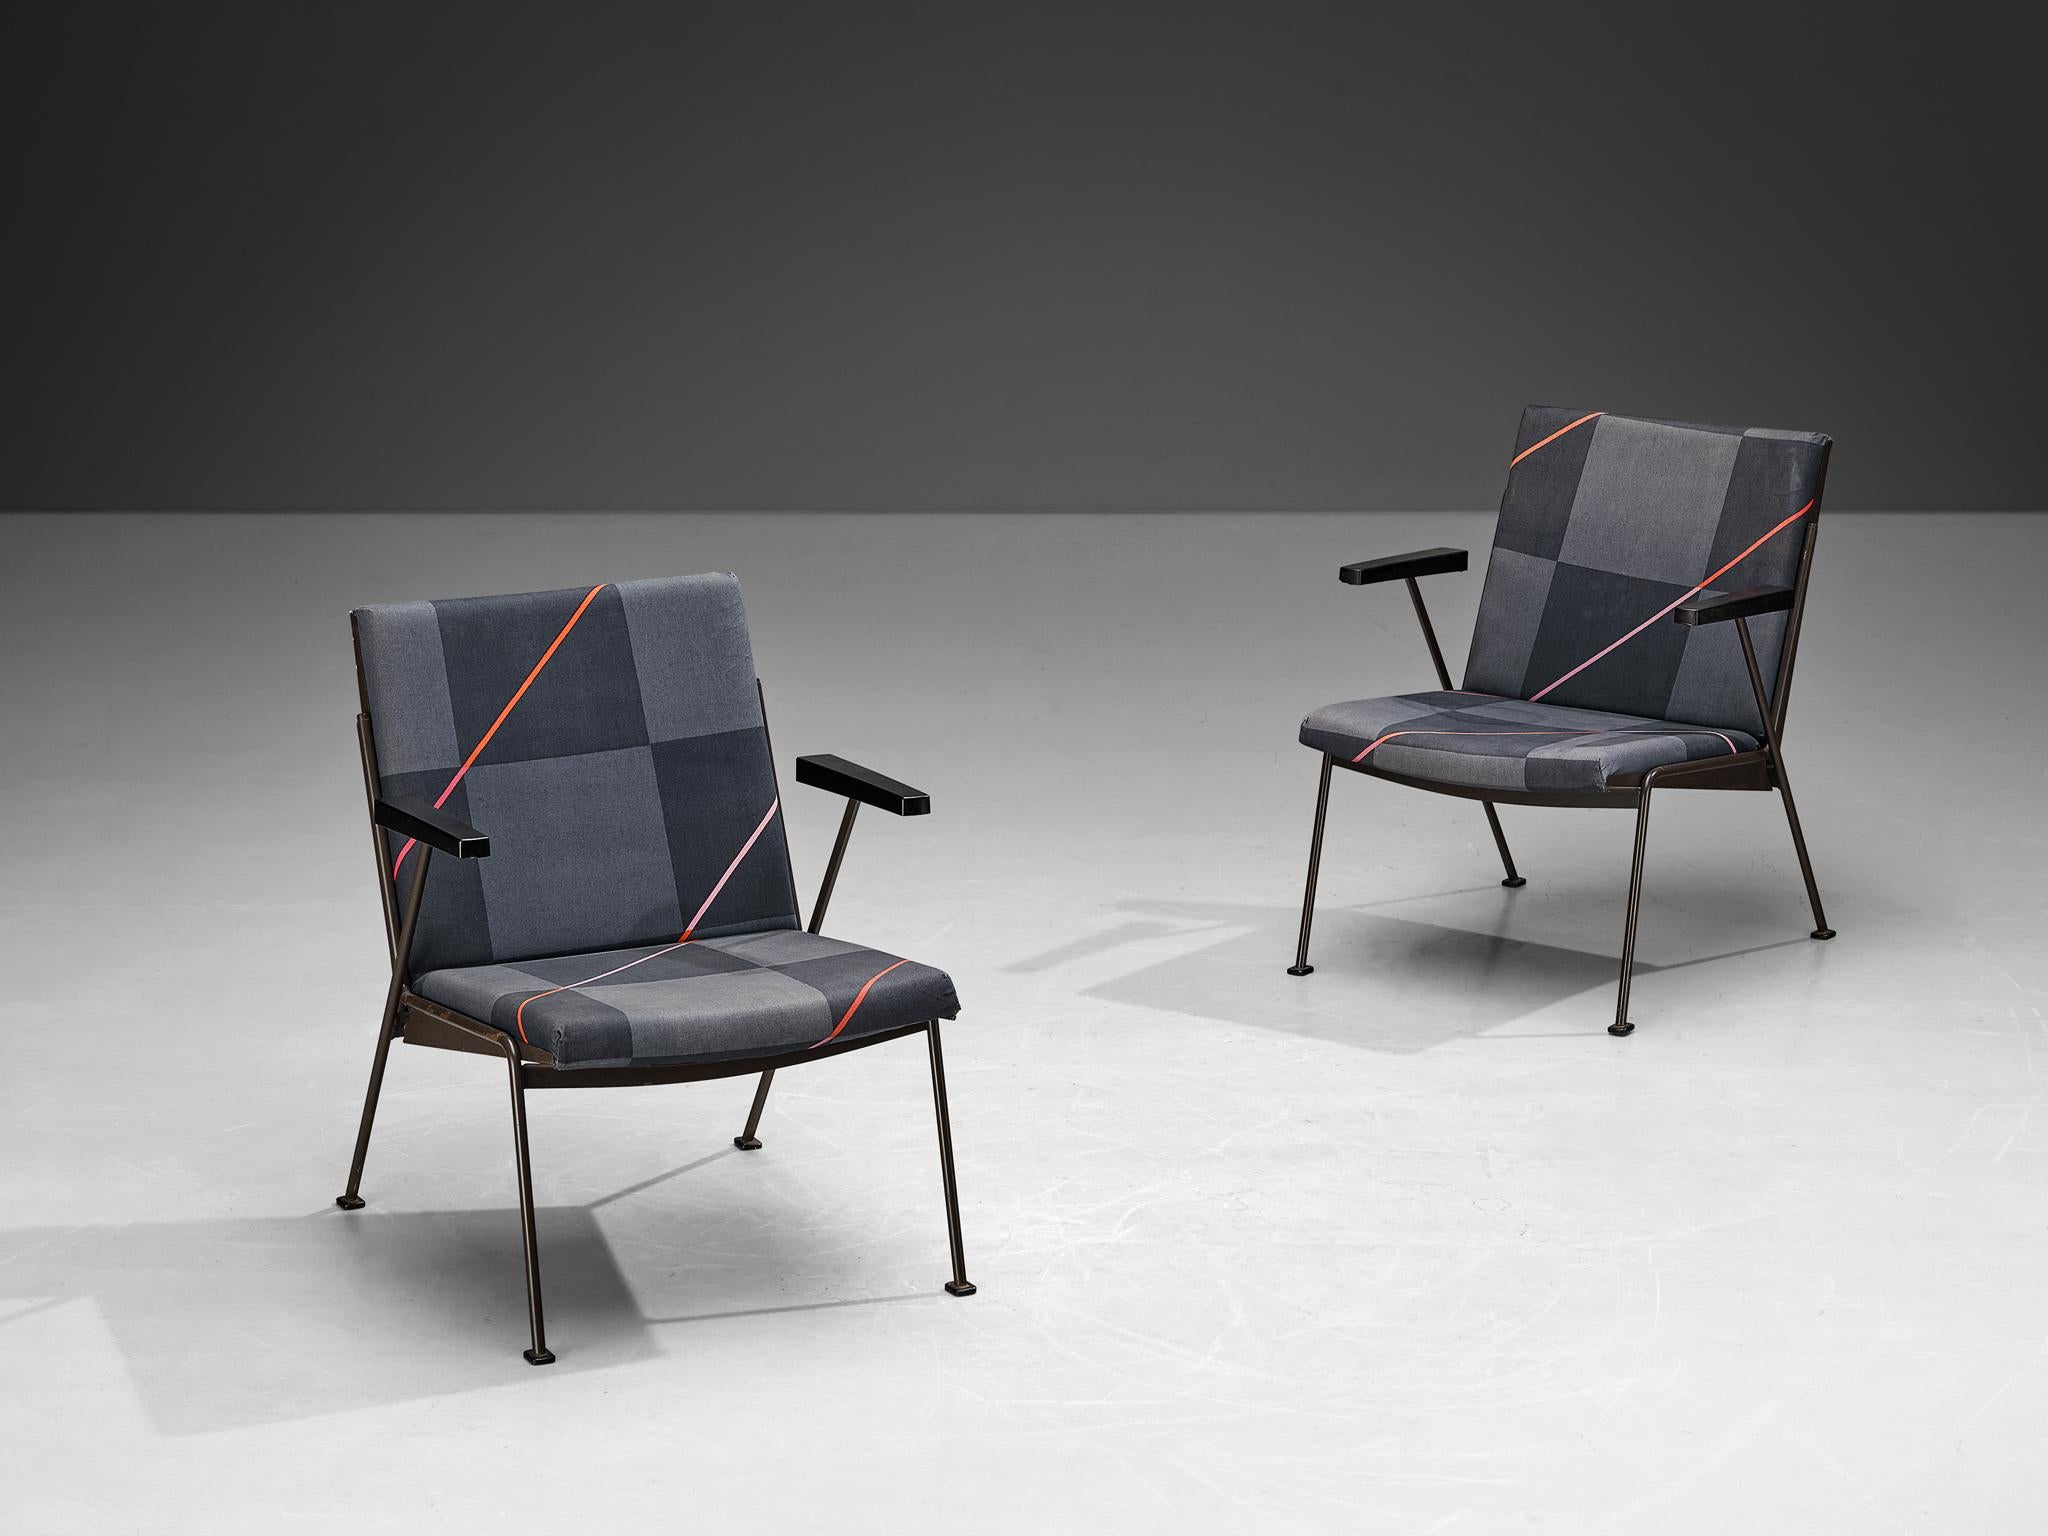 Wim Rietveld for Ahrend De Cirkel, 'Oase' lounge chairs, bakelite, lacquered steel, fabric, The Netherlands, design 1959

The sculptural Oase chair was created by Dutch designer Wim Rietveld for Ahrend De Cirkel. This comfortable set is attractive